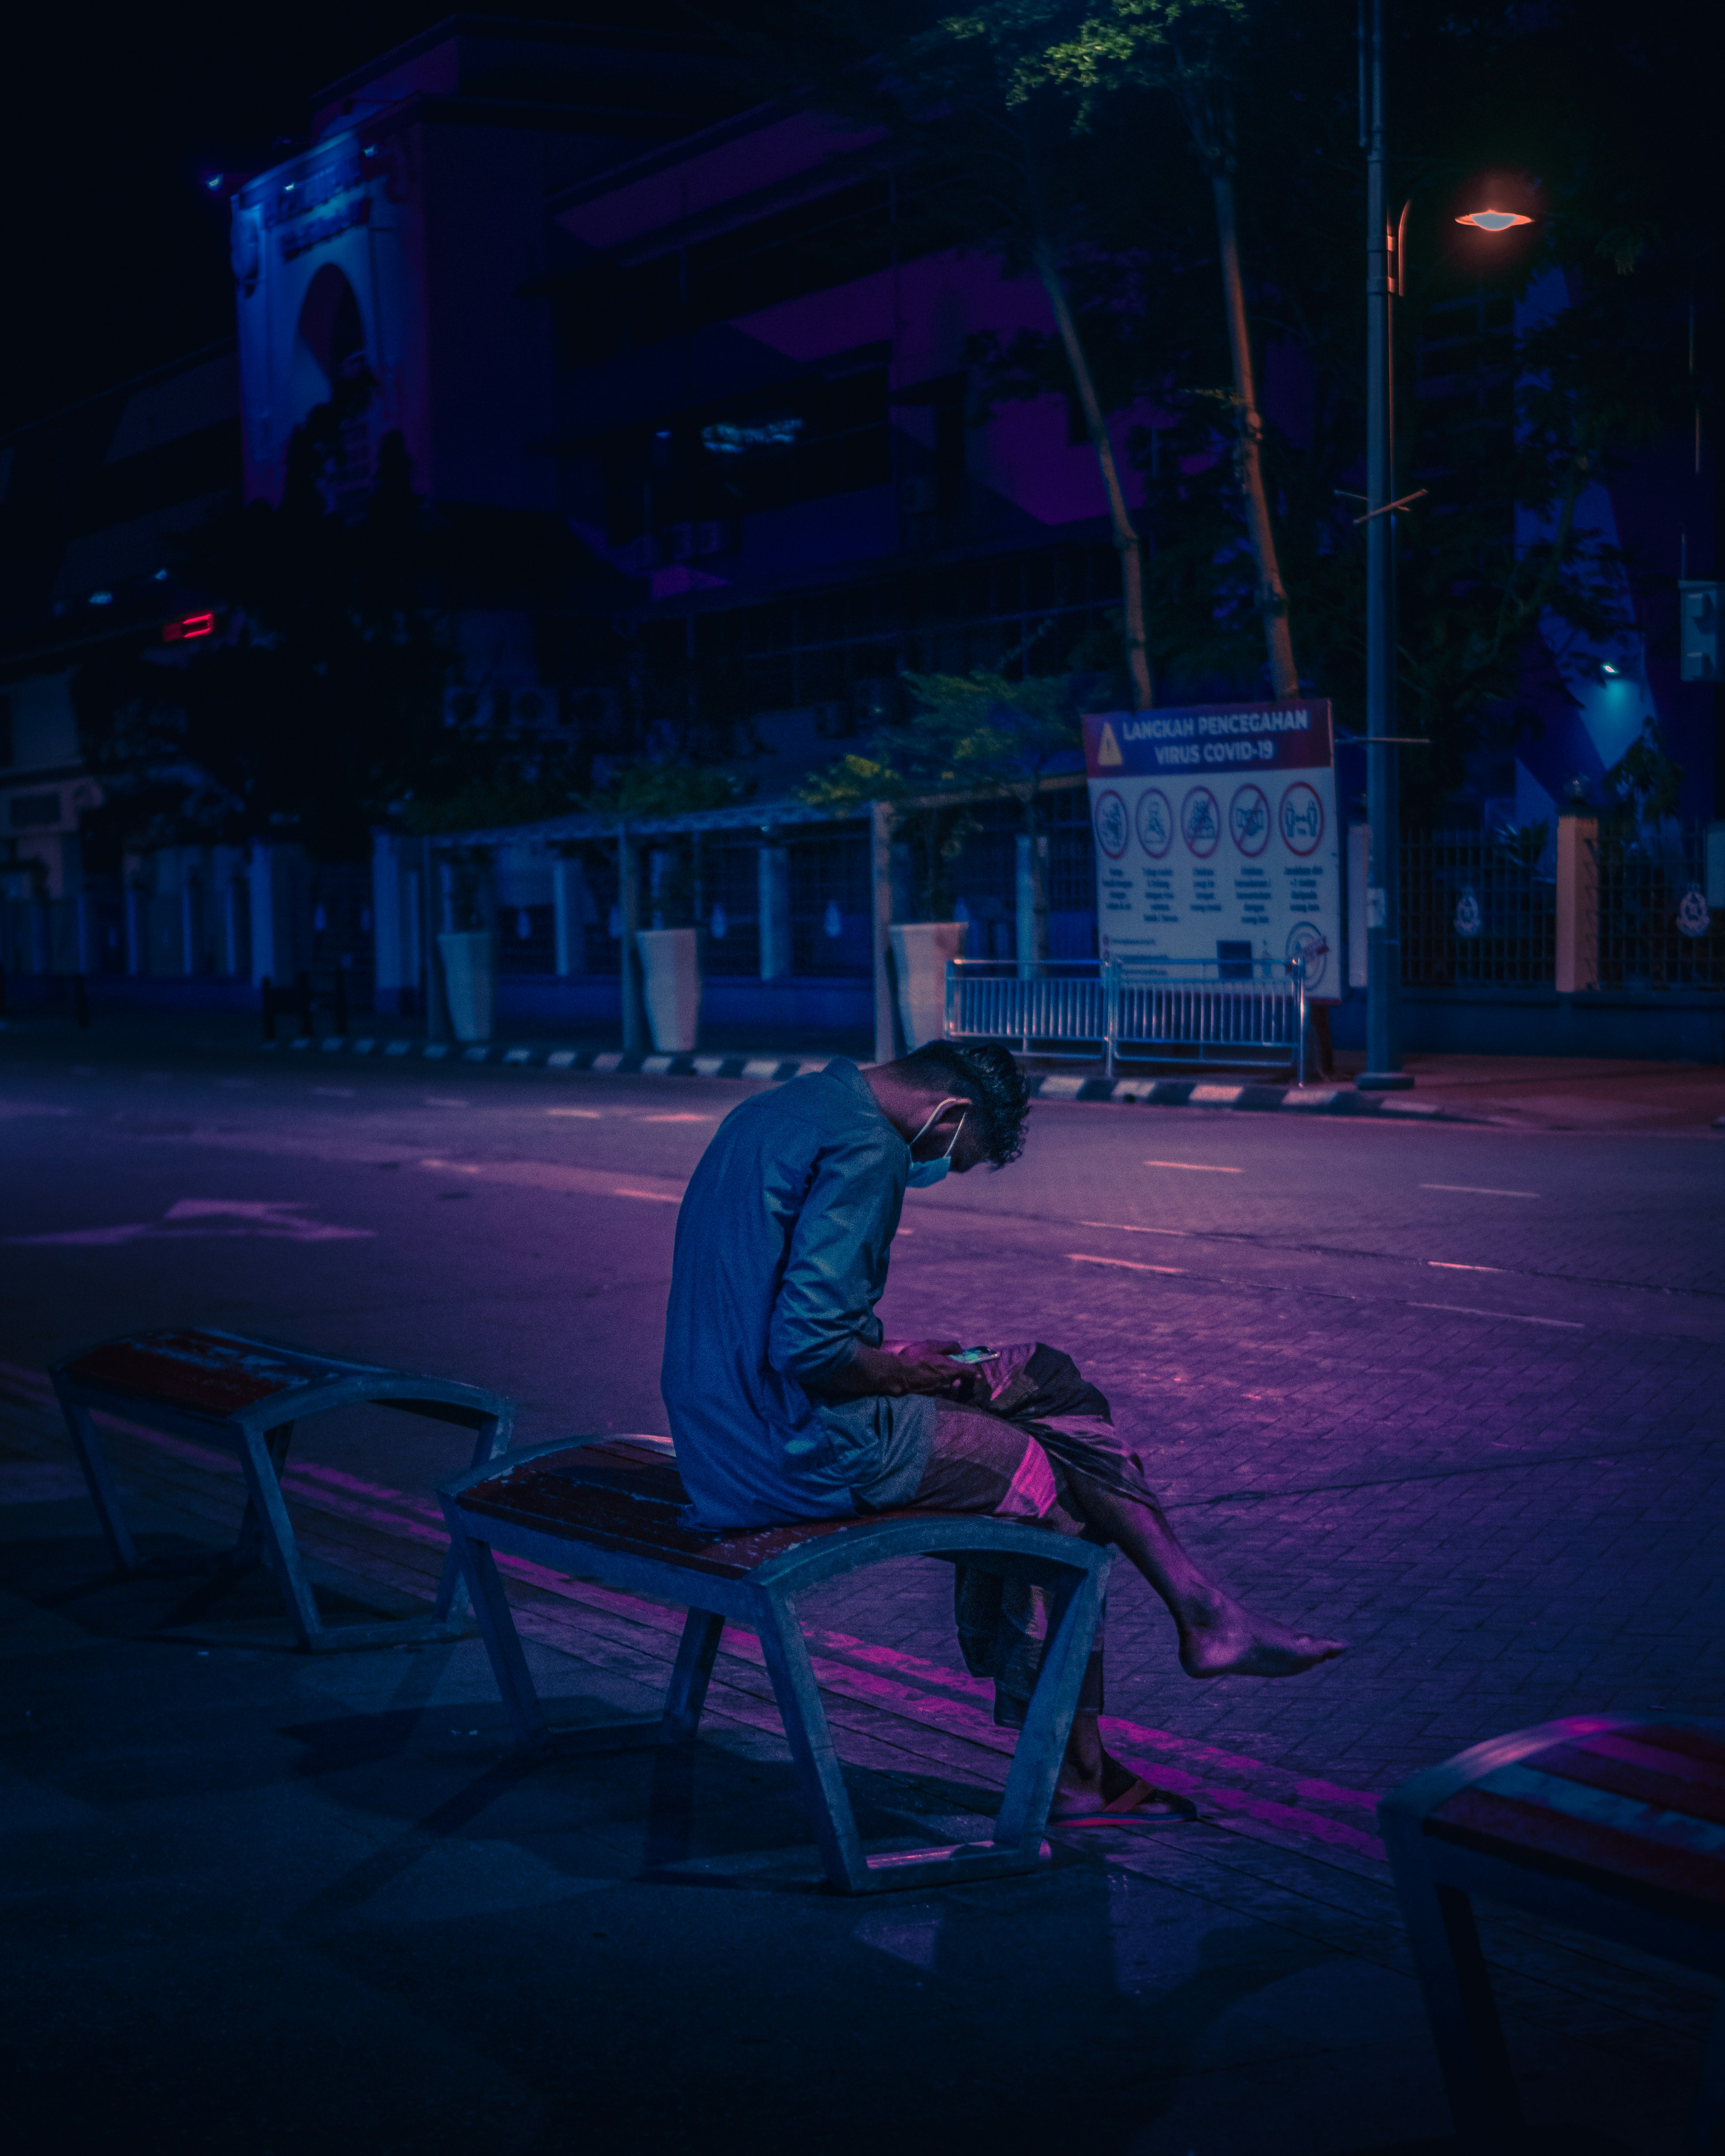 man in blue shirt sitting on brown wooden chair during night time